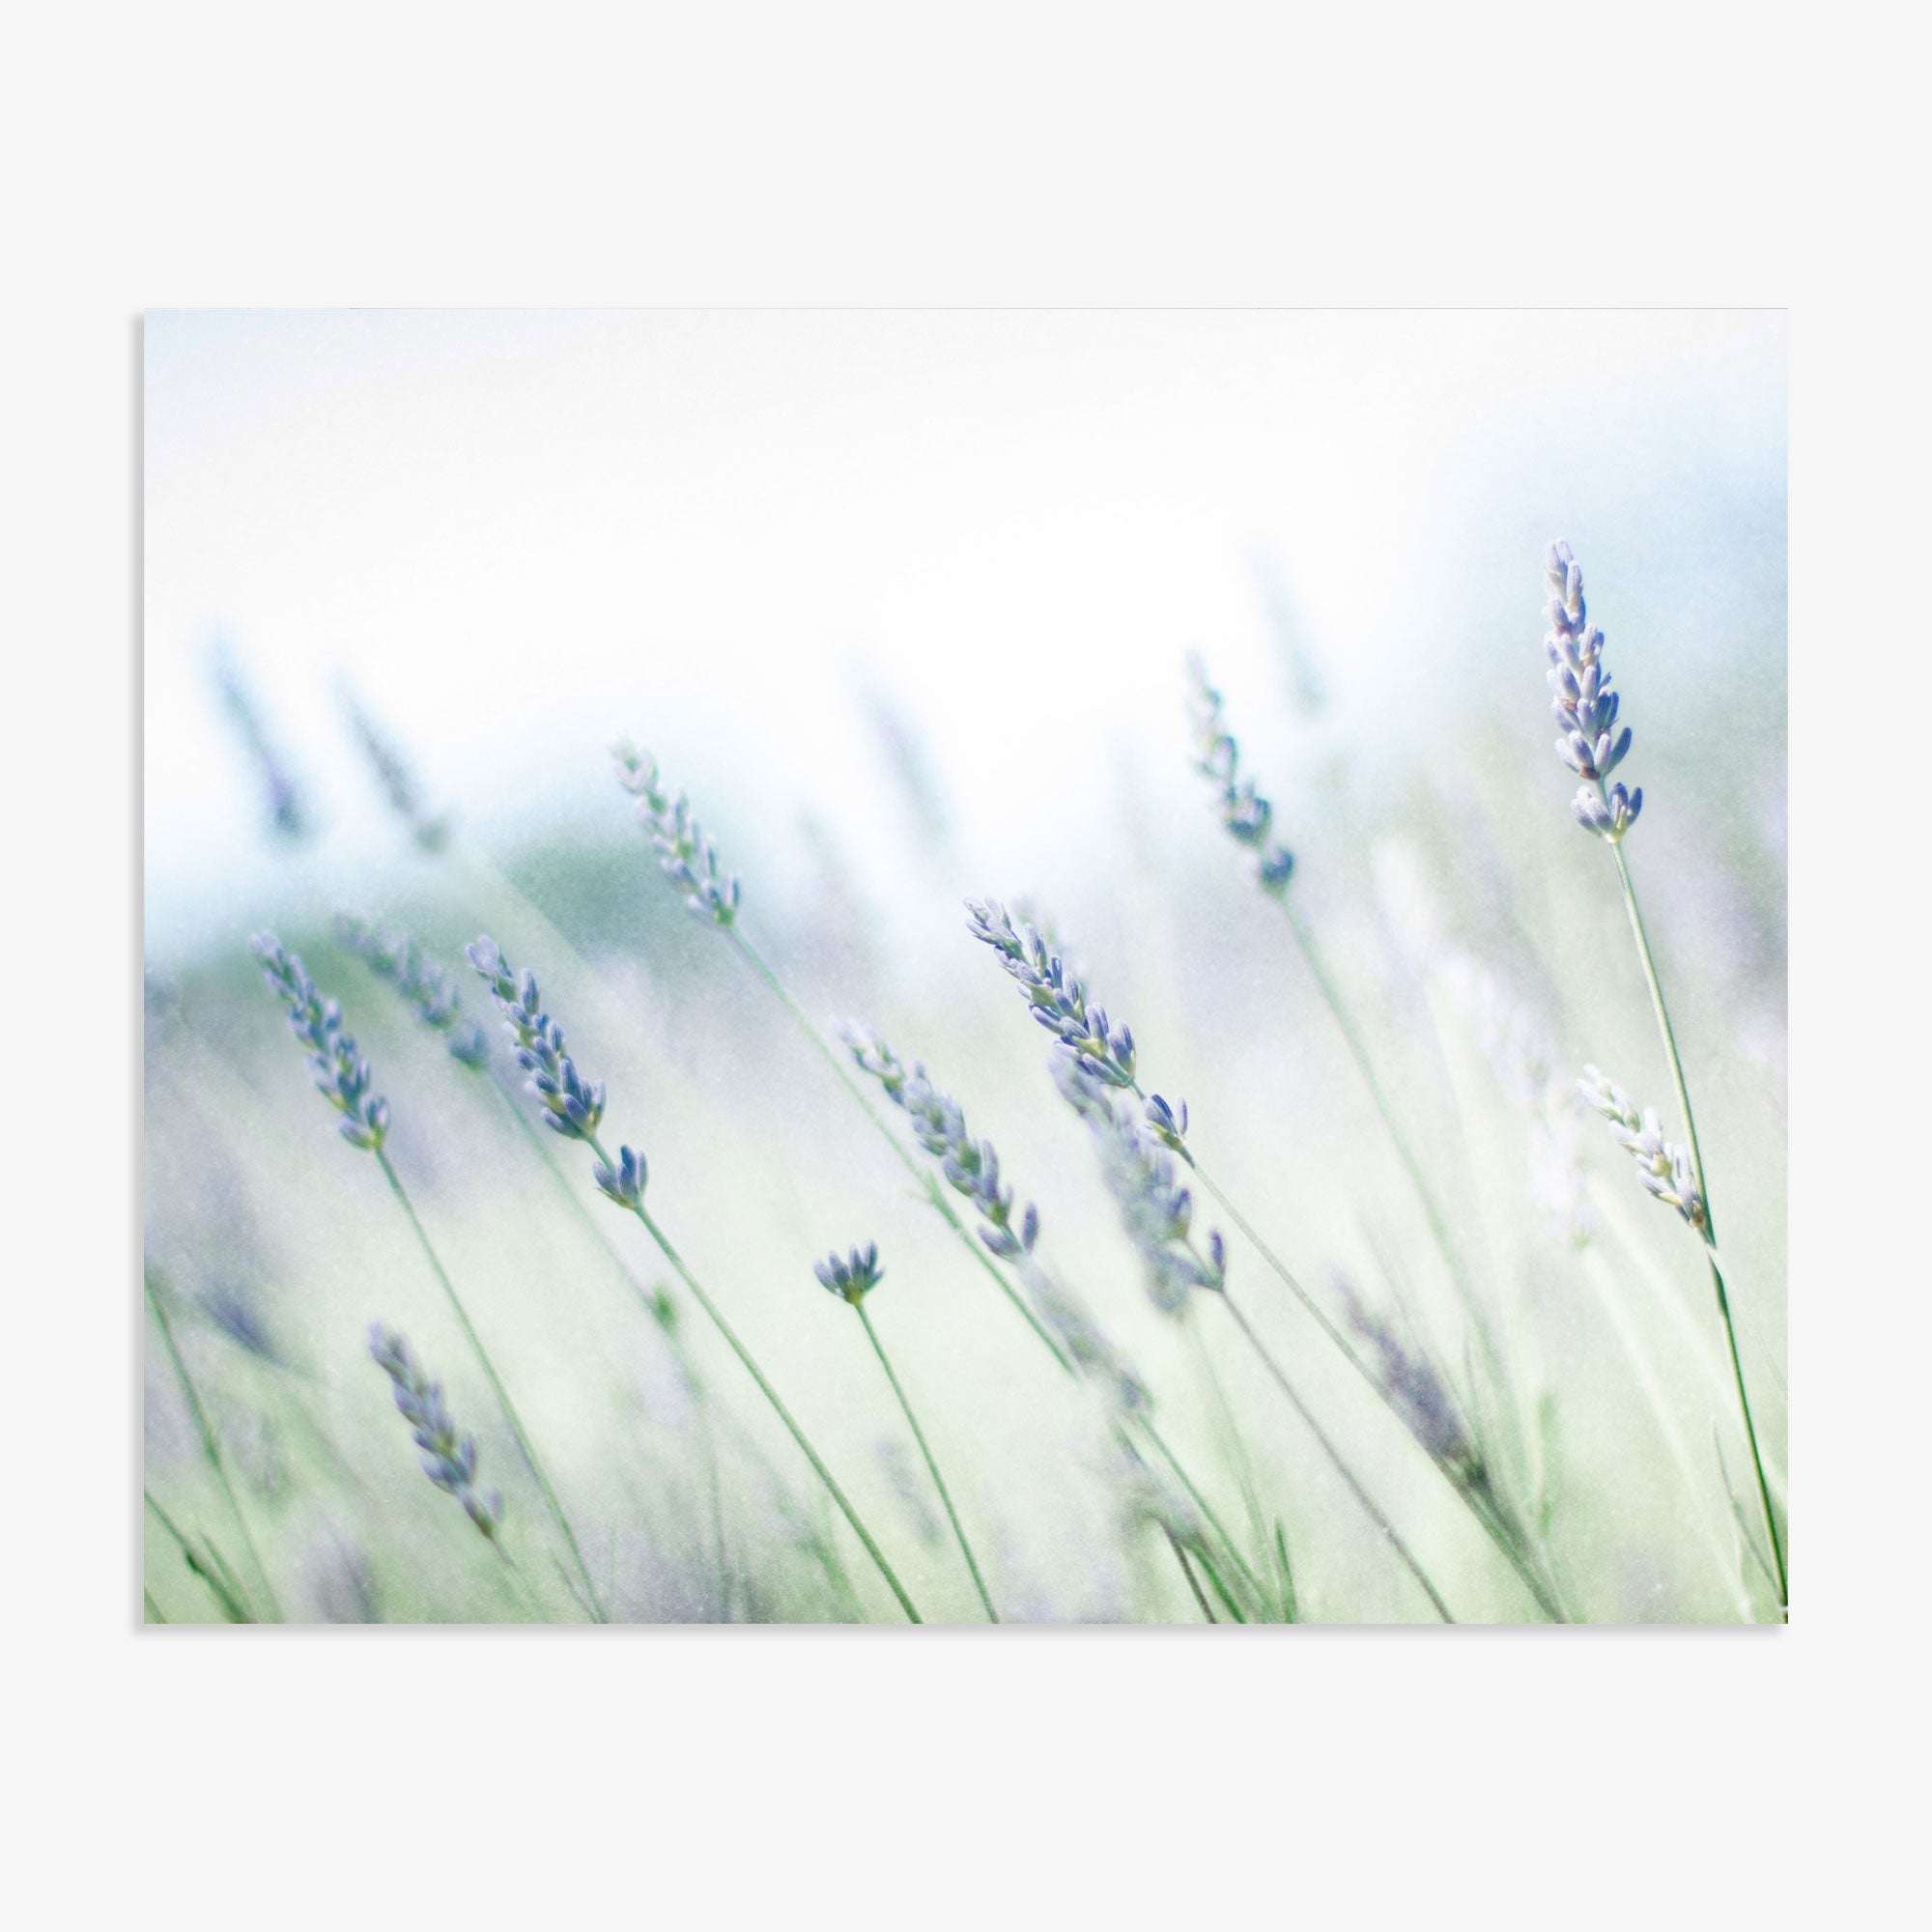 A soft-focus image of lavender flowers gently swaying in the Santa Ynez Valley, with a blurred light green and white background suggesting a hazy, serene atmosphere is captured in the Rustic Farmhouse Floral Wall Art, &#39;Buds of Lavender&#39; by Offley Green.